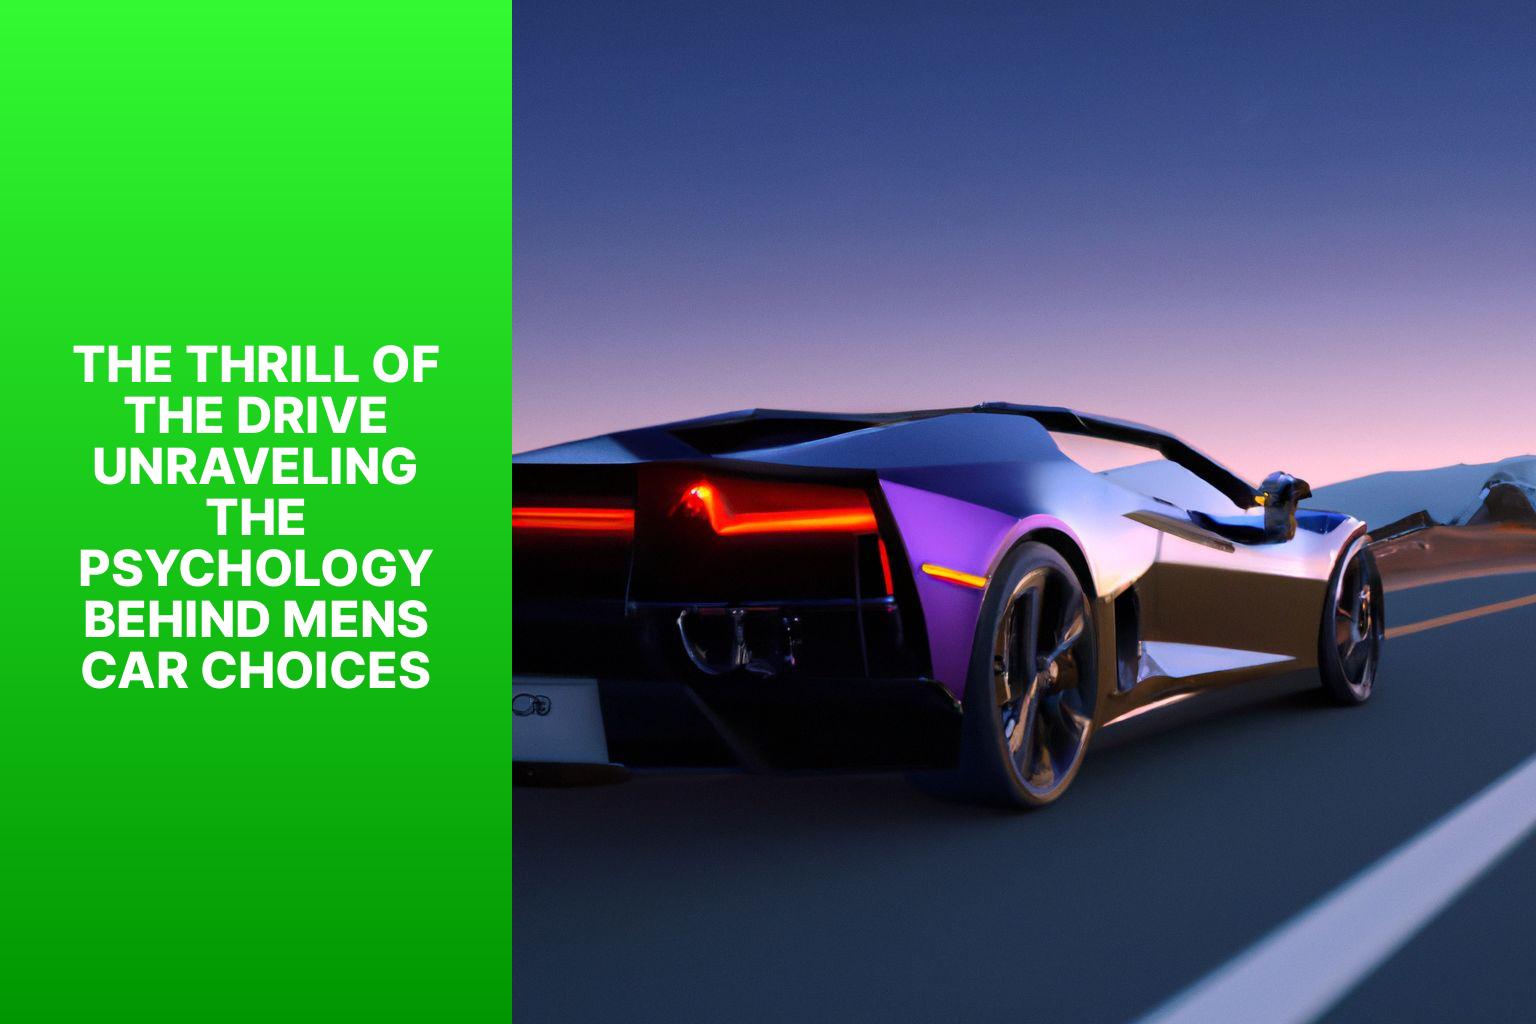 The Thrill of the Drive: Unraveling the Psychology Behind Men’s Car Choices